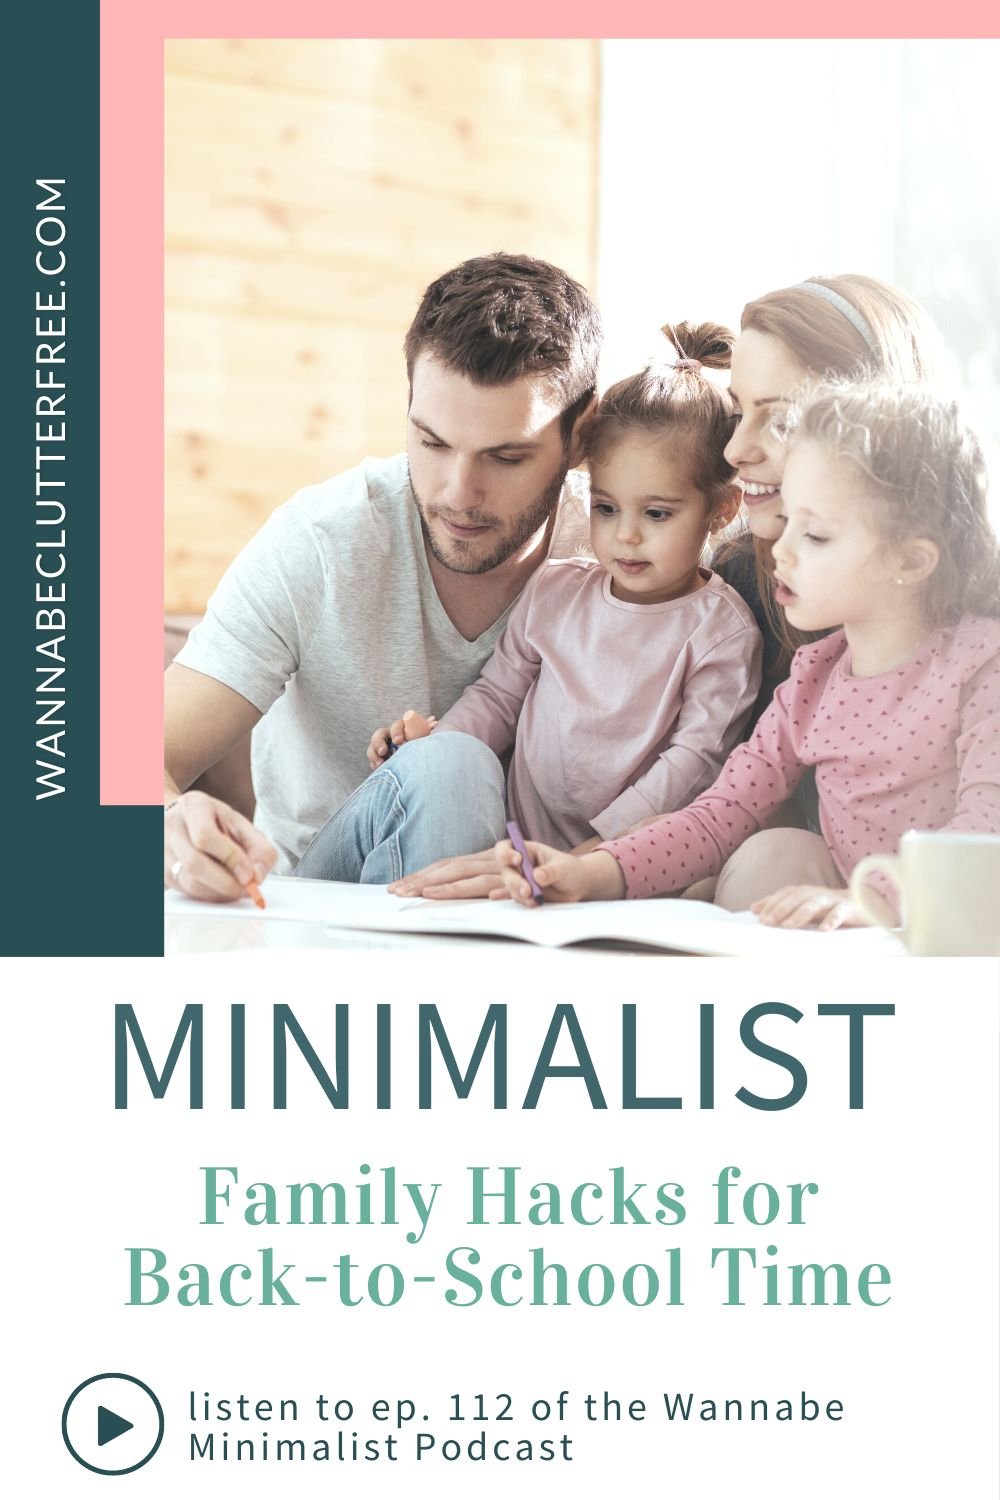 Minimalist family hacks for back to school time